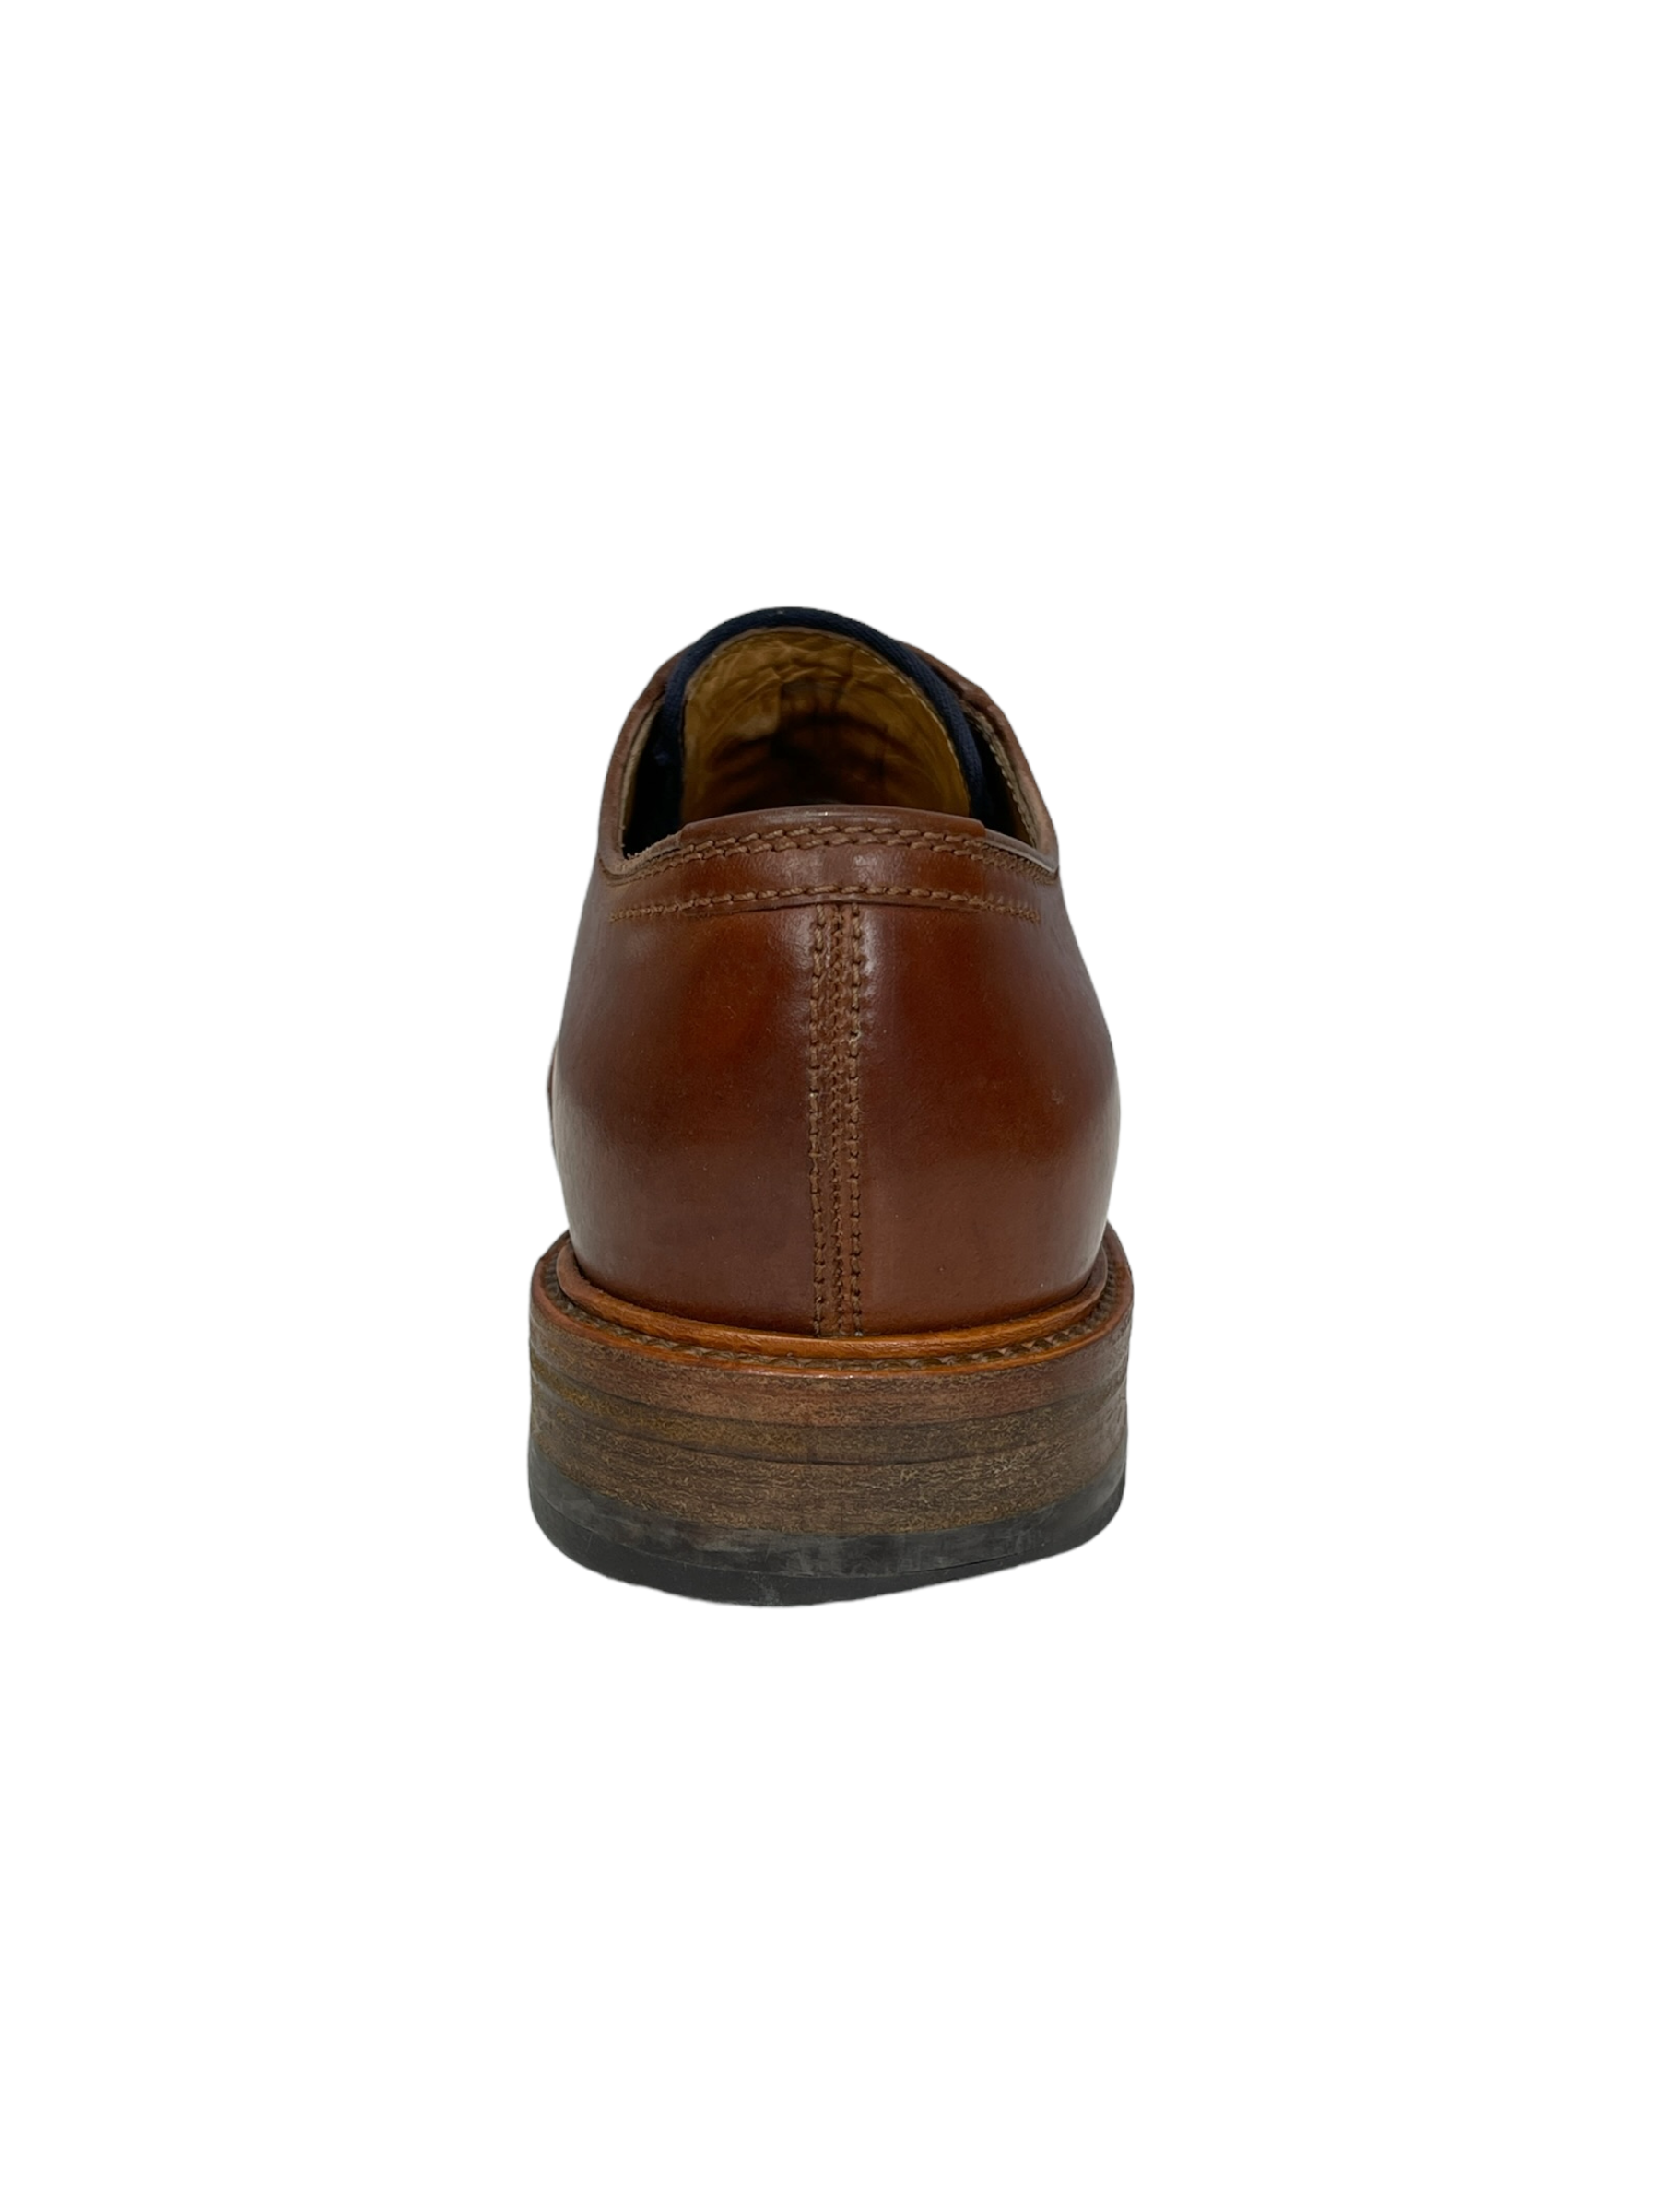 Brunello Cucinelli Brown Leather Derby Dress Shoe 8- Genuine Design Luxury Consignment Calgary, Alberta, Canada New and Pre-Owned Clothing, Shoes, Accessories.